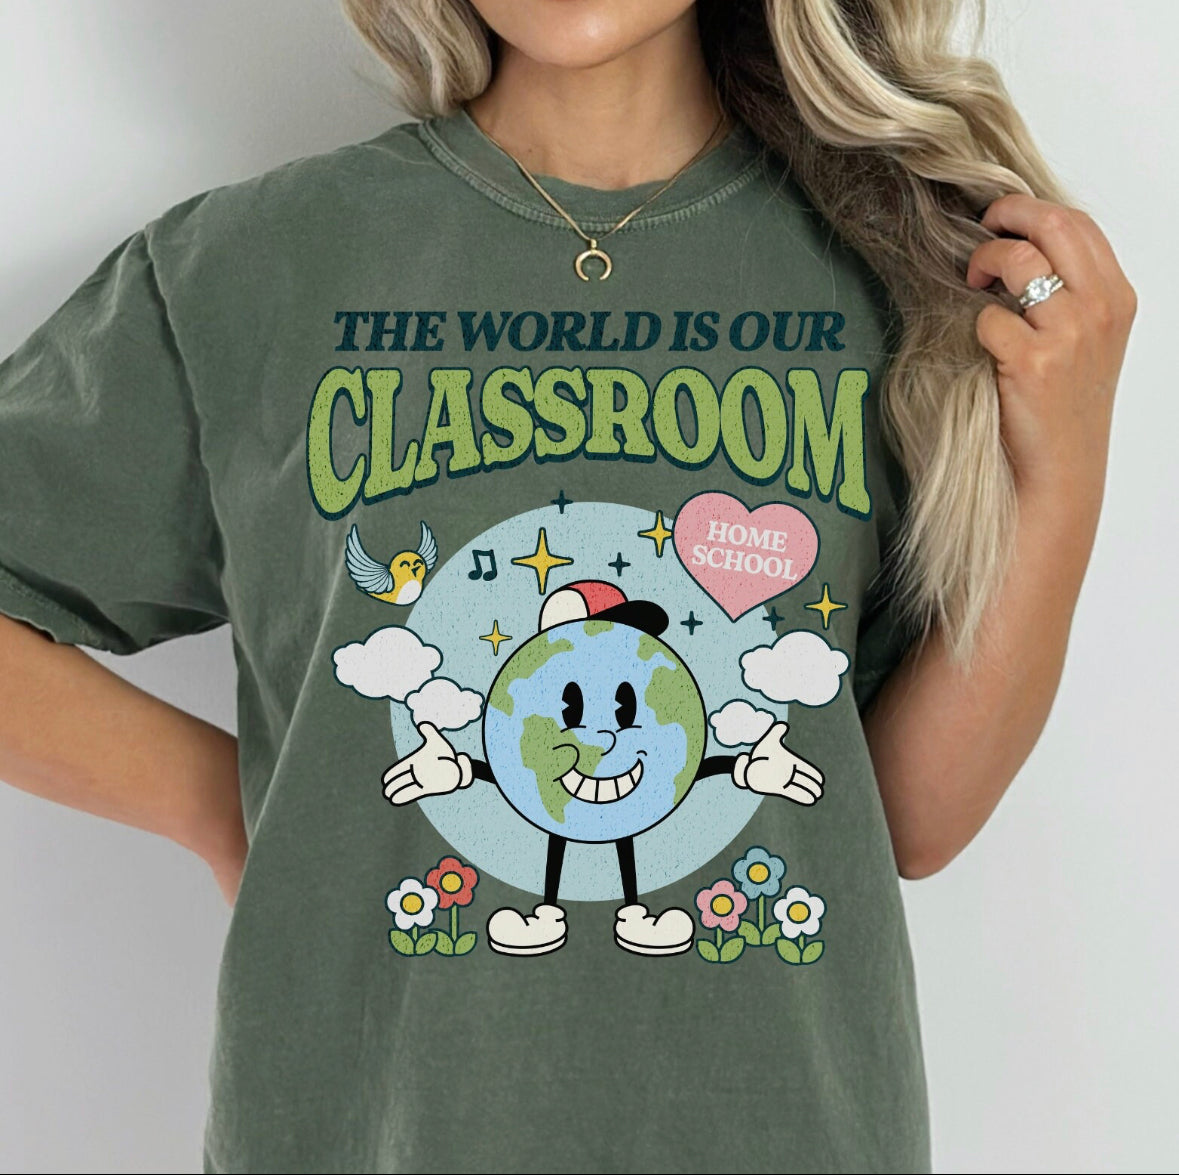 The world is our classroom